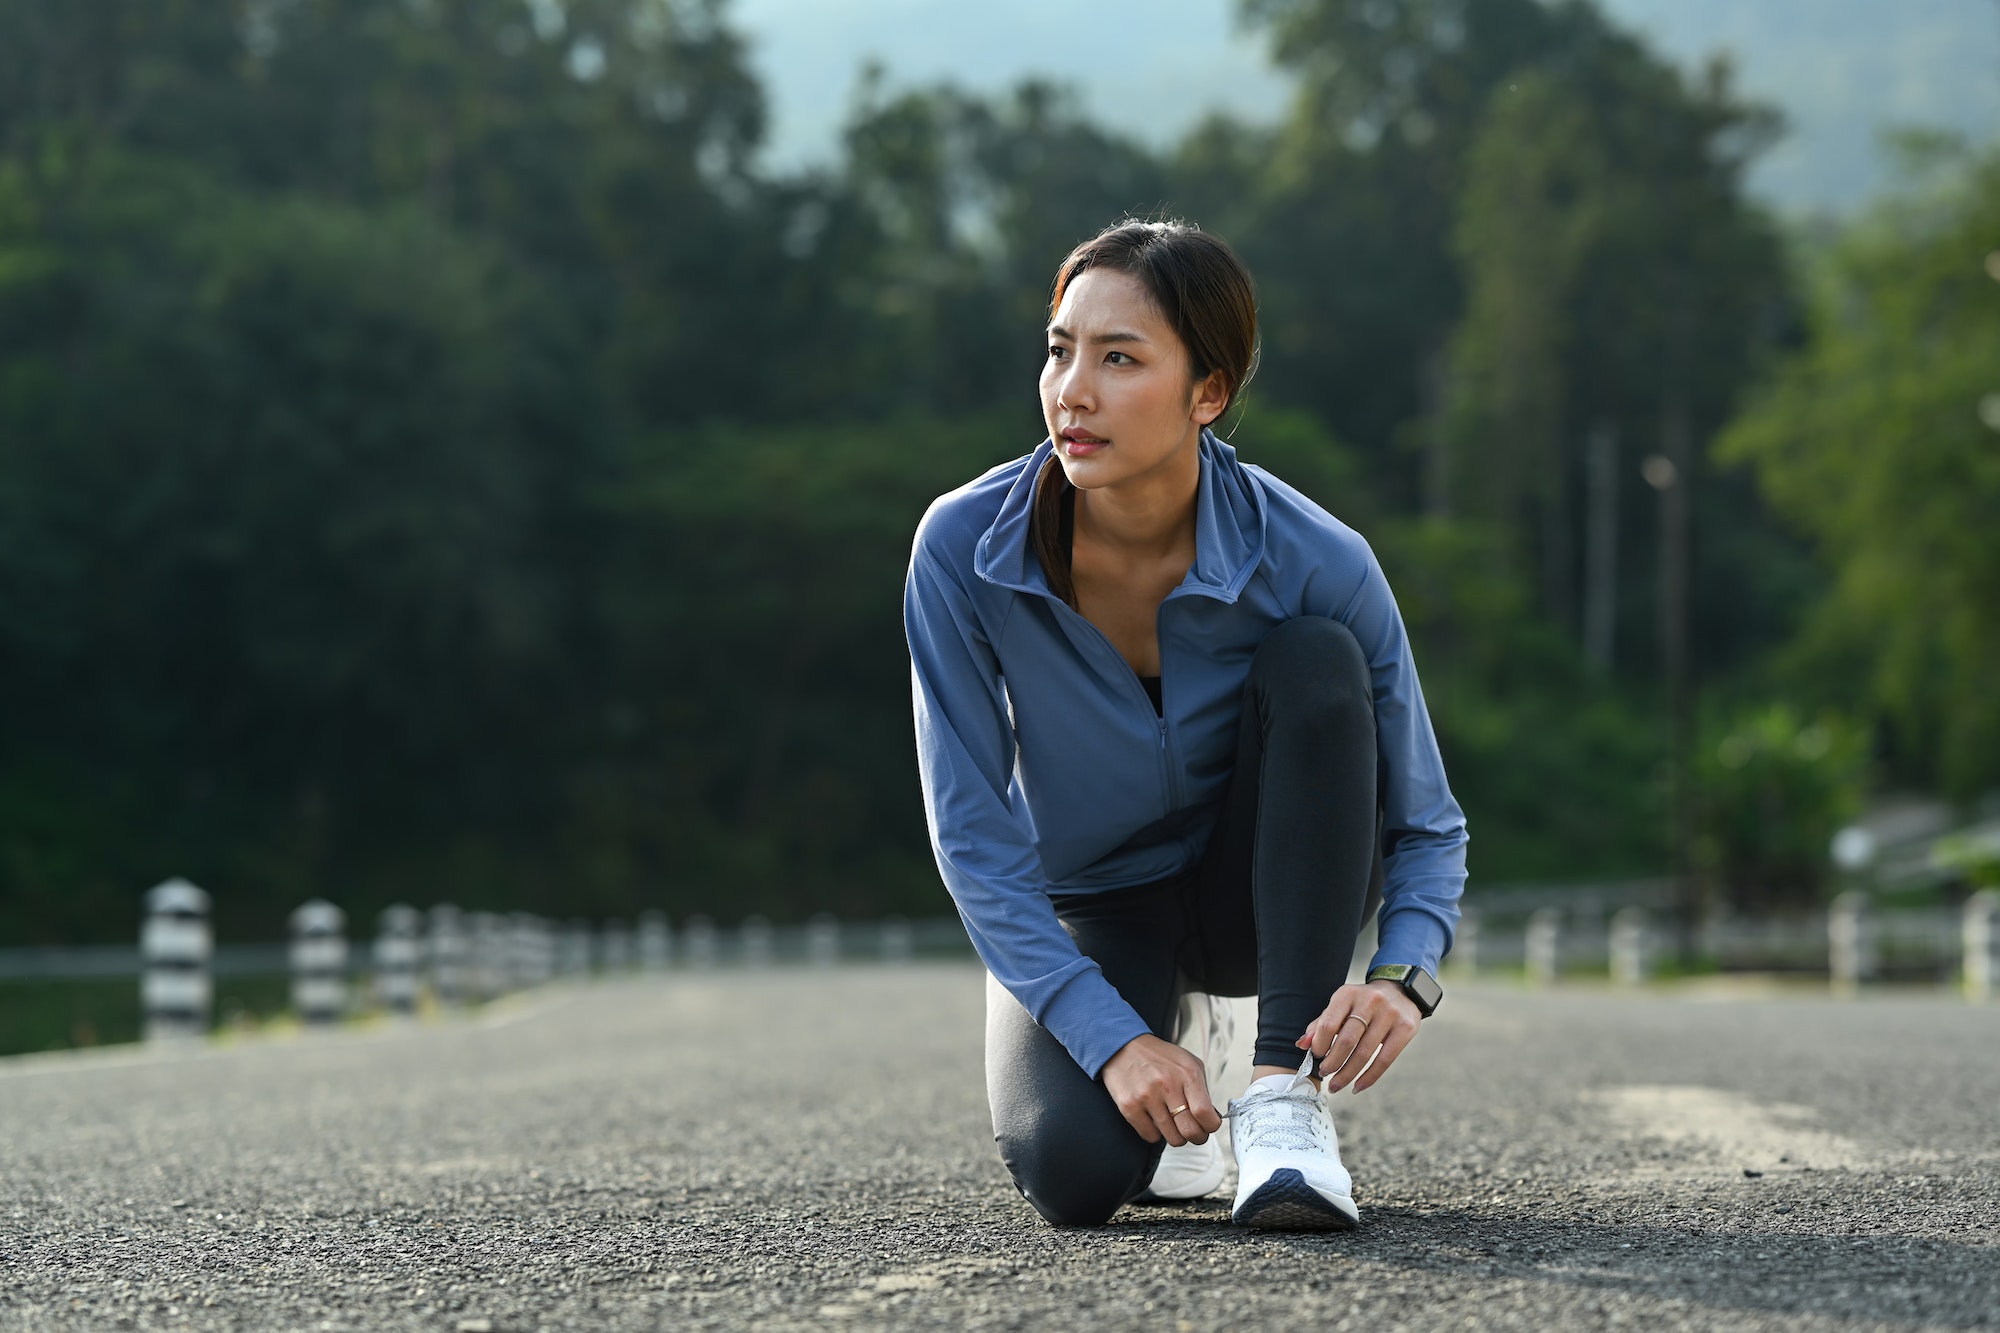 Image of asian woman tying shoelace before running outdoors.